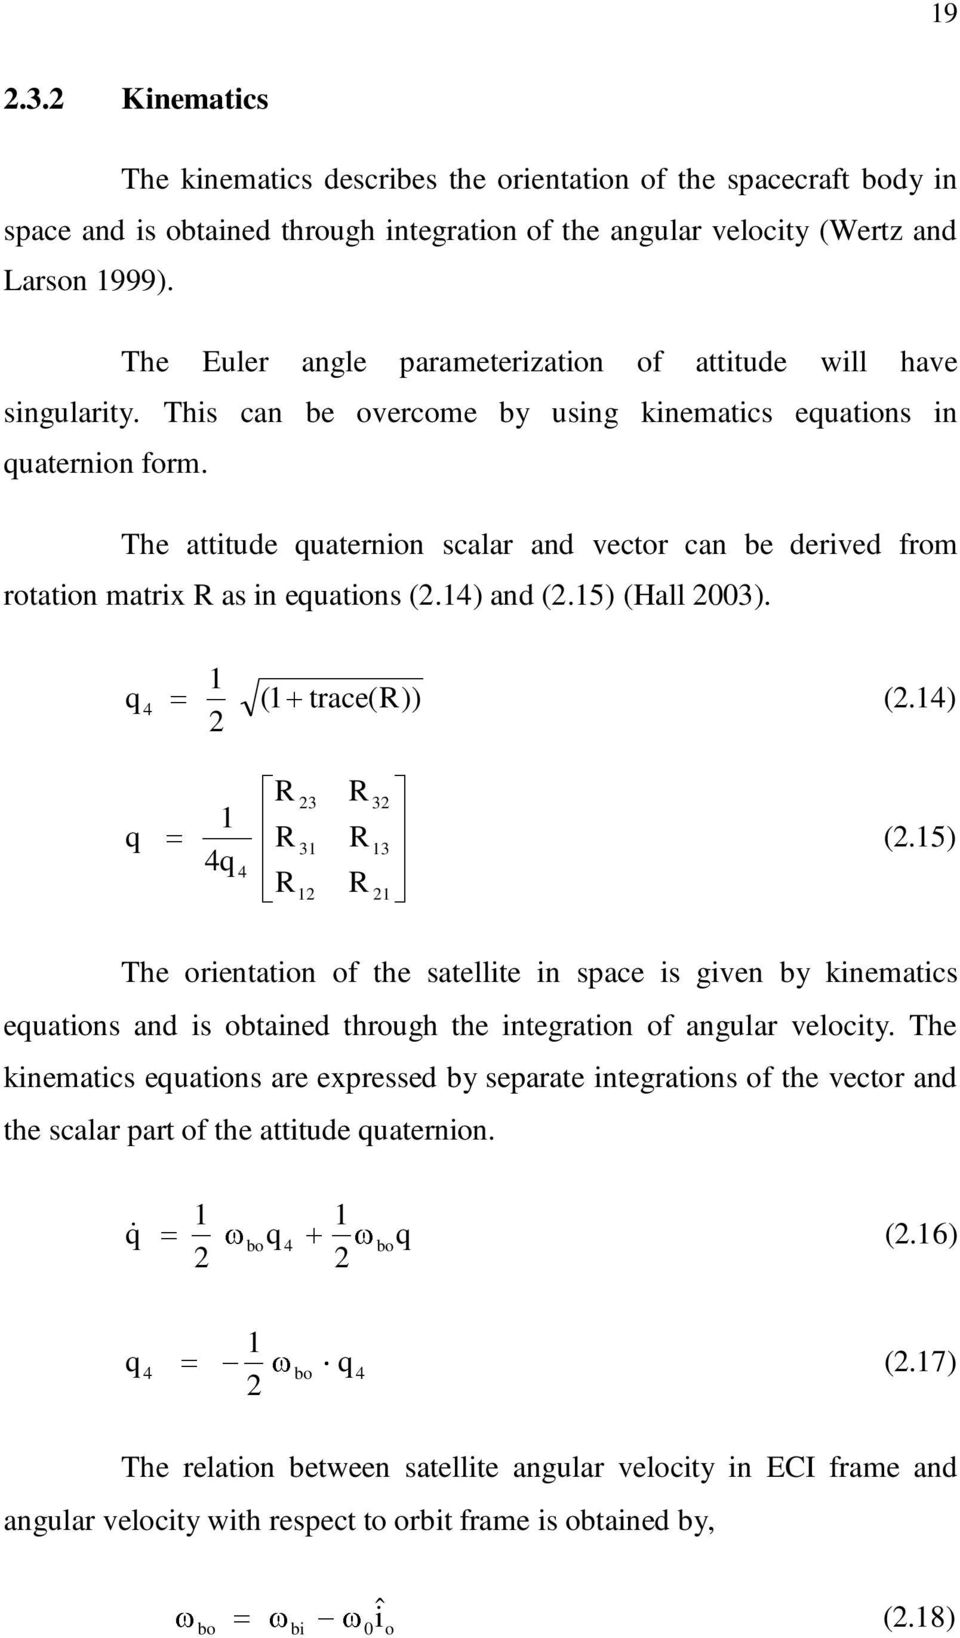 The attitude quaternion scalar and vector can be derived from rotation matrix R as in equations (2.14) and (2.15) (Hall 2003). 1 q 4 (1 trace(r)) (2.14) 2 R 23 R 32 1 q R 31 R 13 (2.